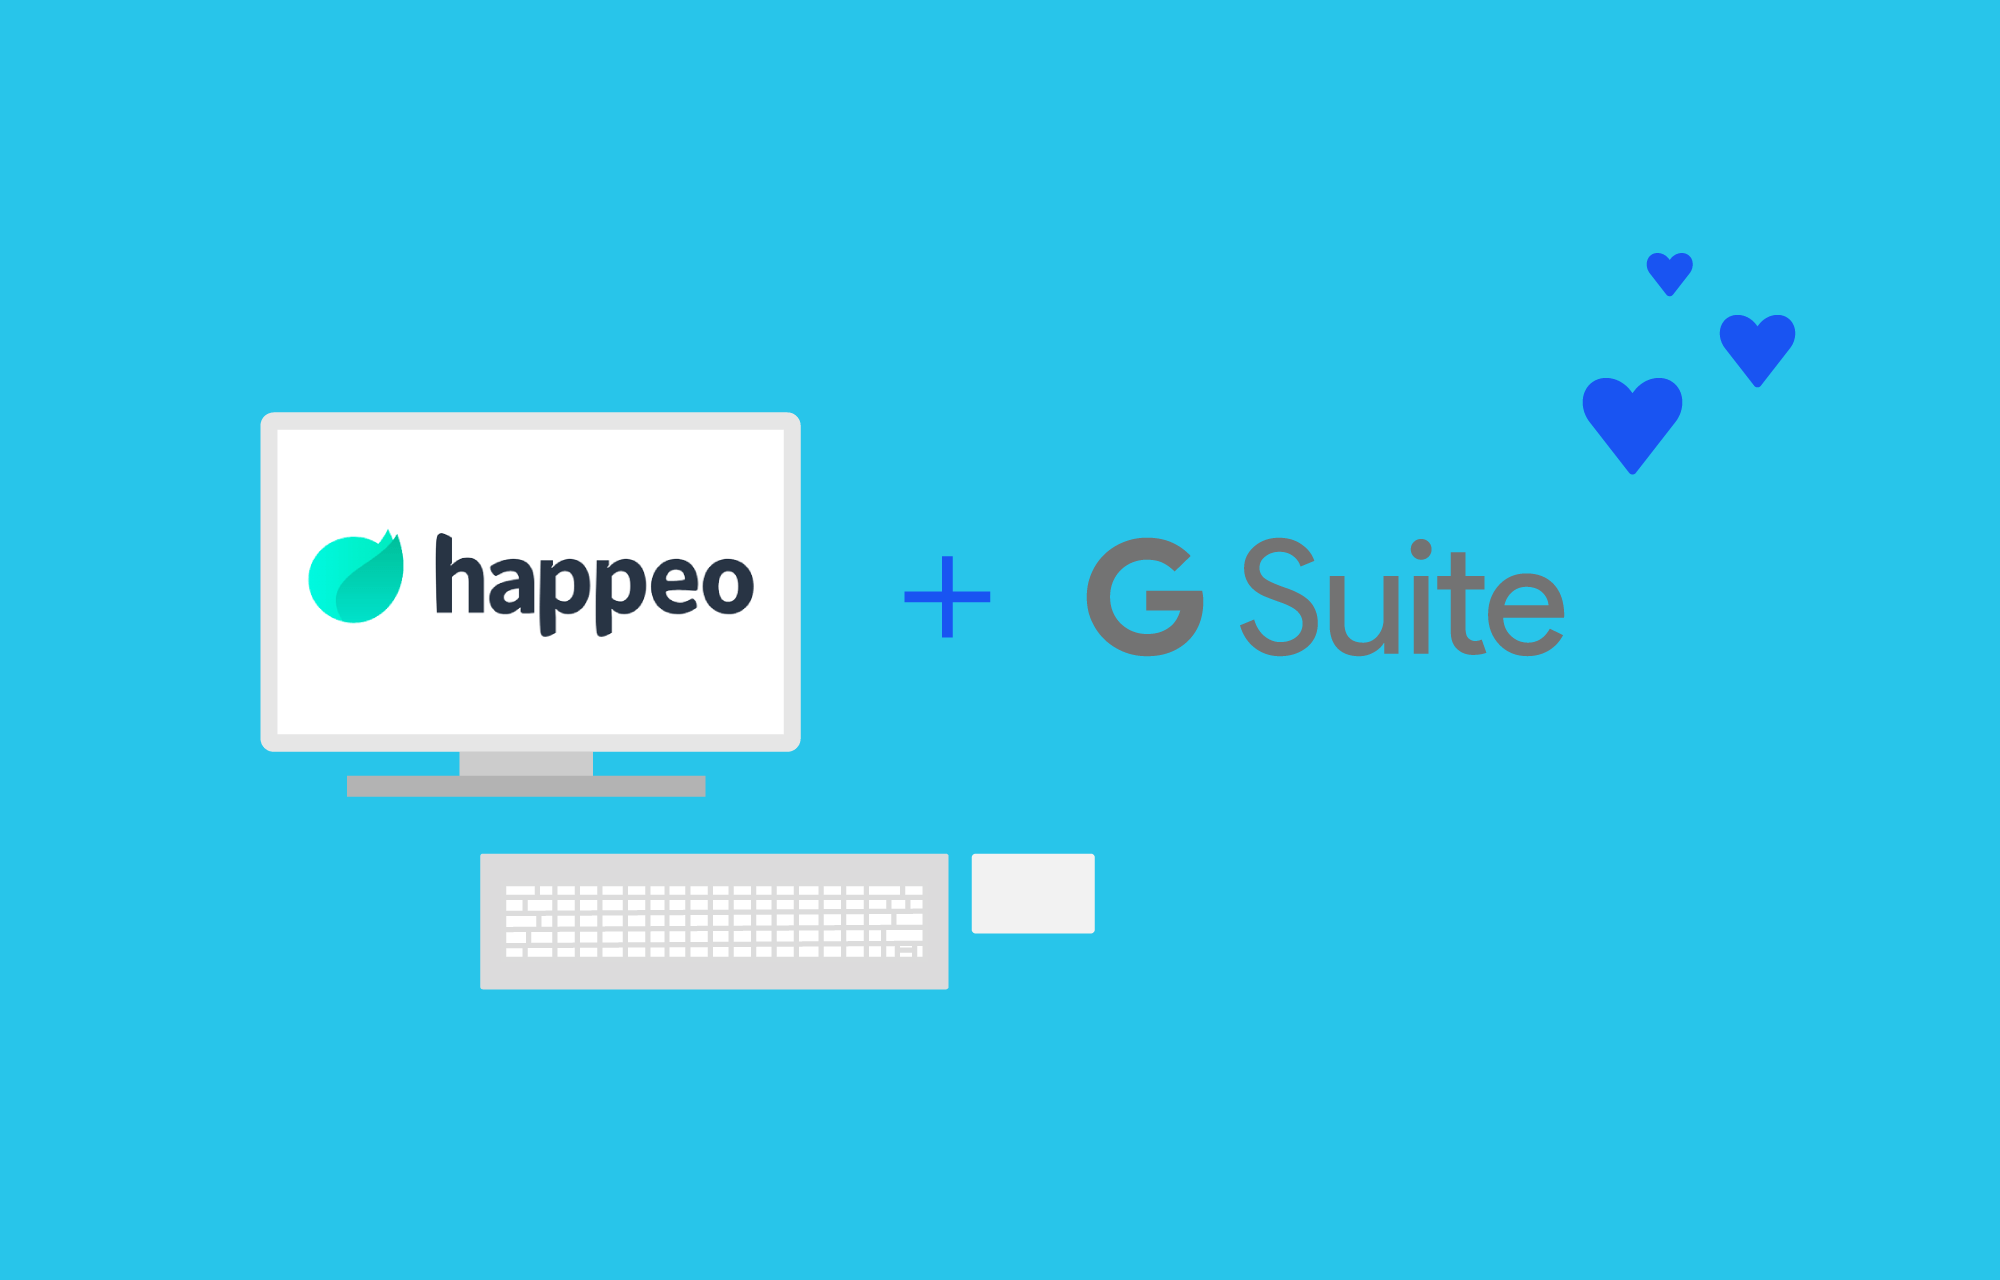 Can Happeo make G Suite users happier?